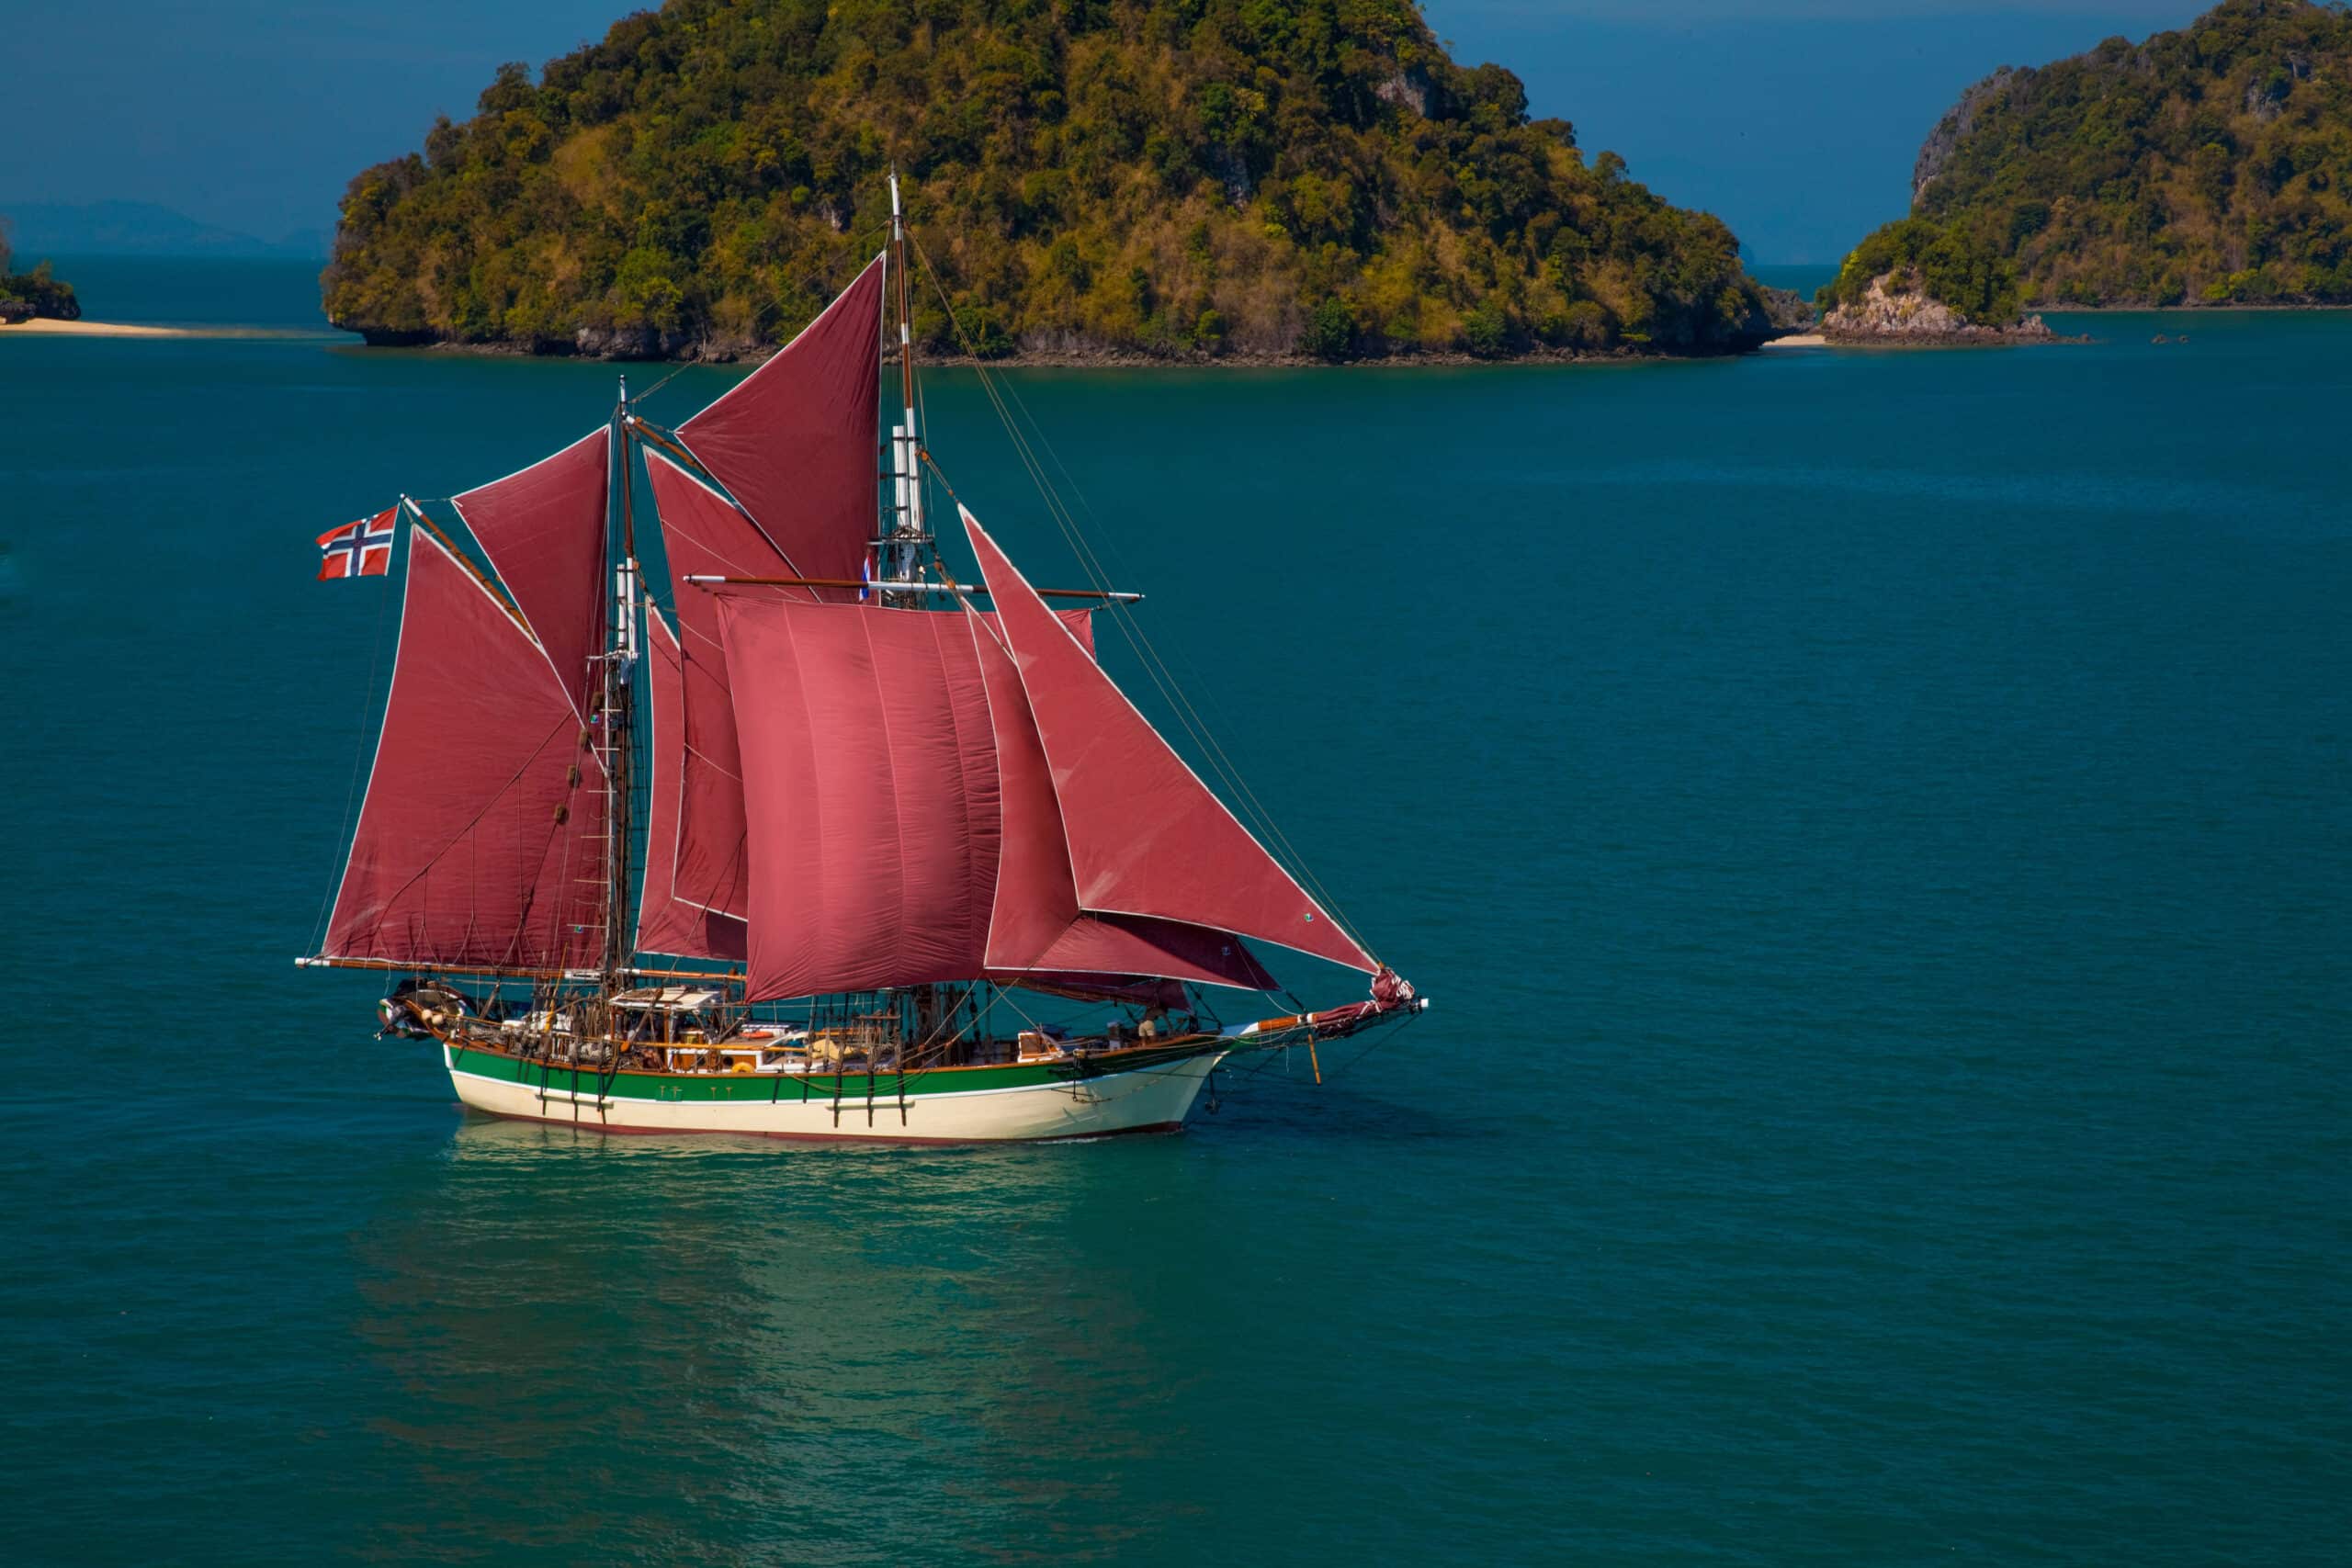 A sailboat sails through turquoise waters with red sails, powered by lithium batteries